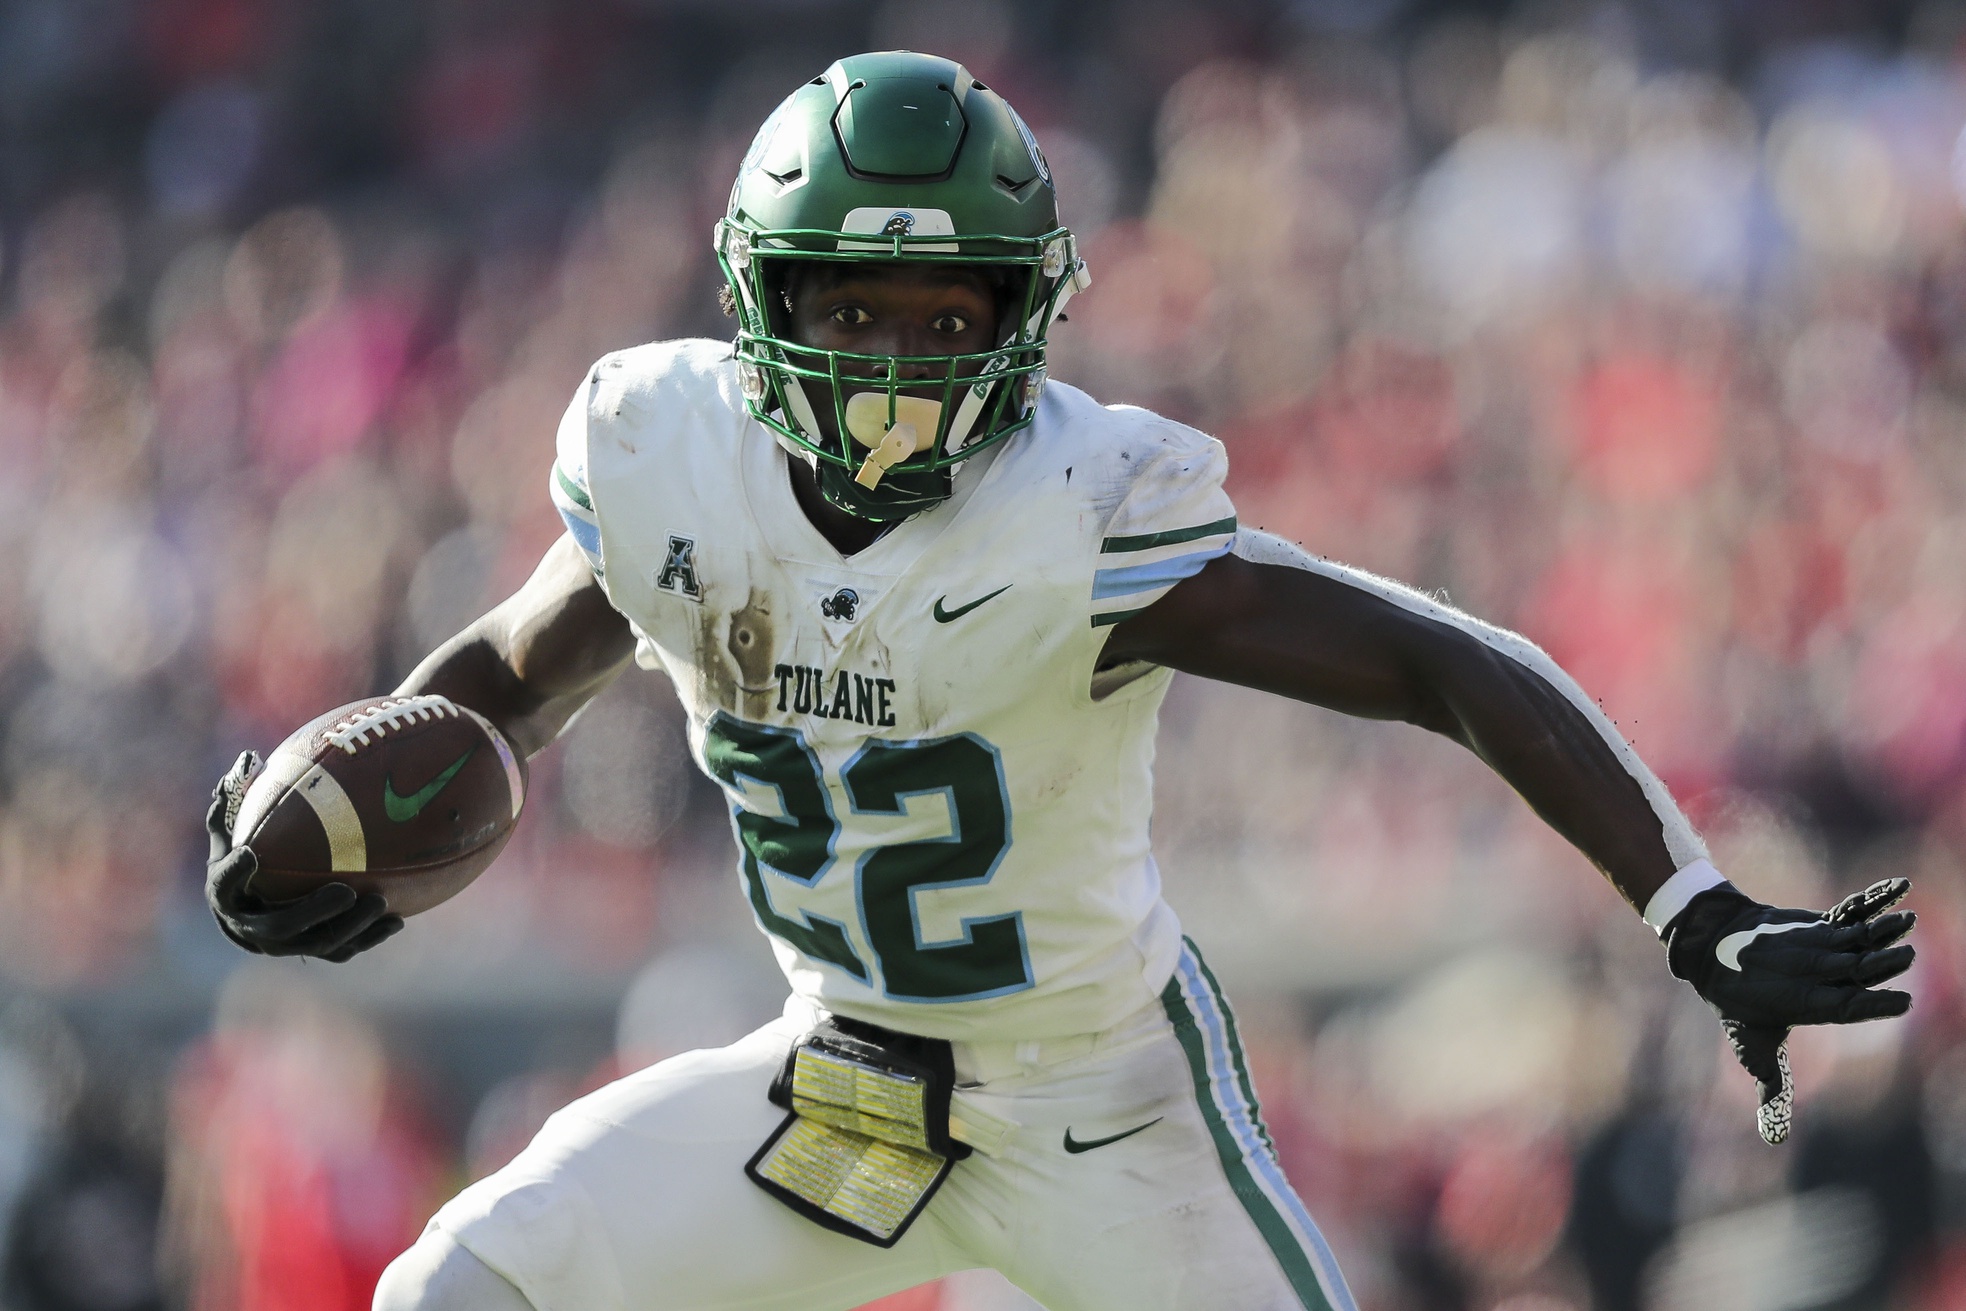 Tulane Green Wave Preview: Roster, Prospects, Schedule, and More